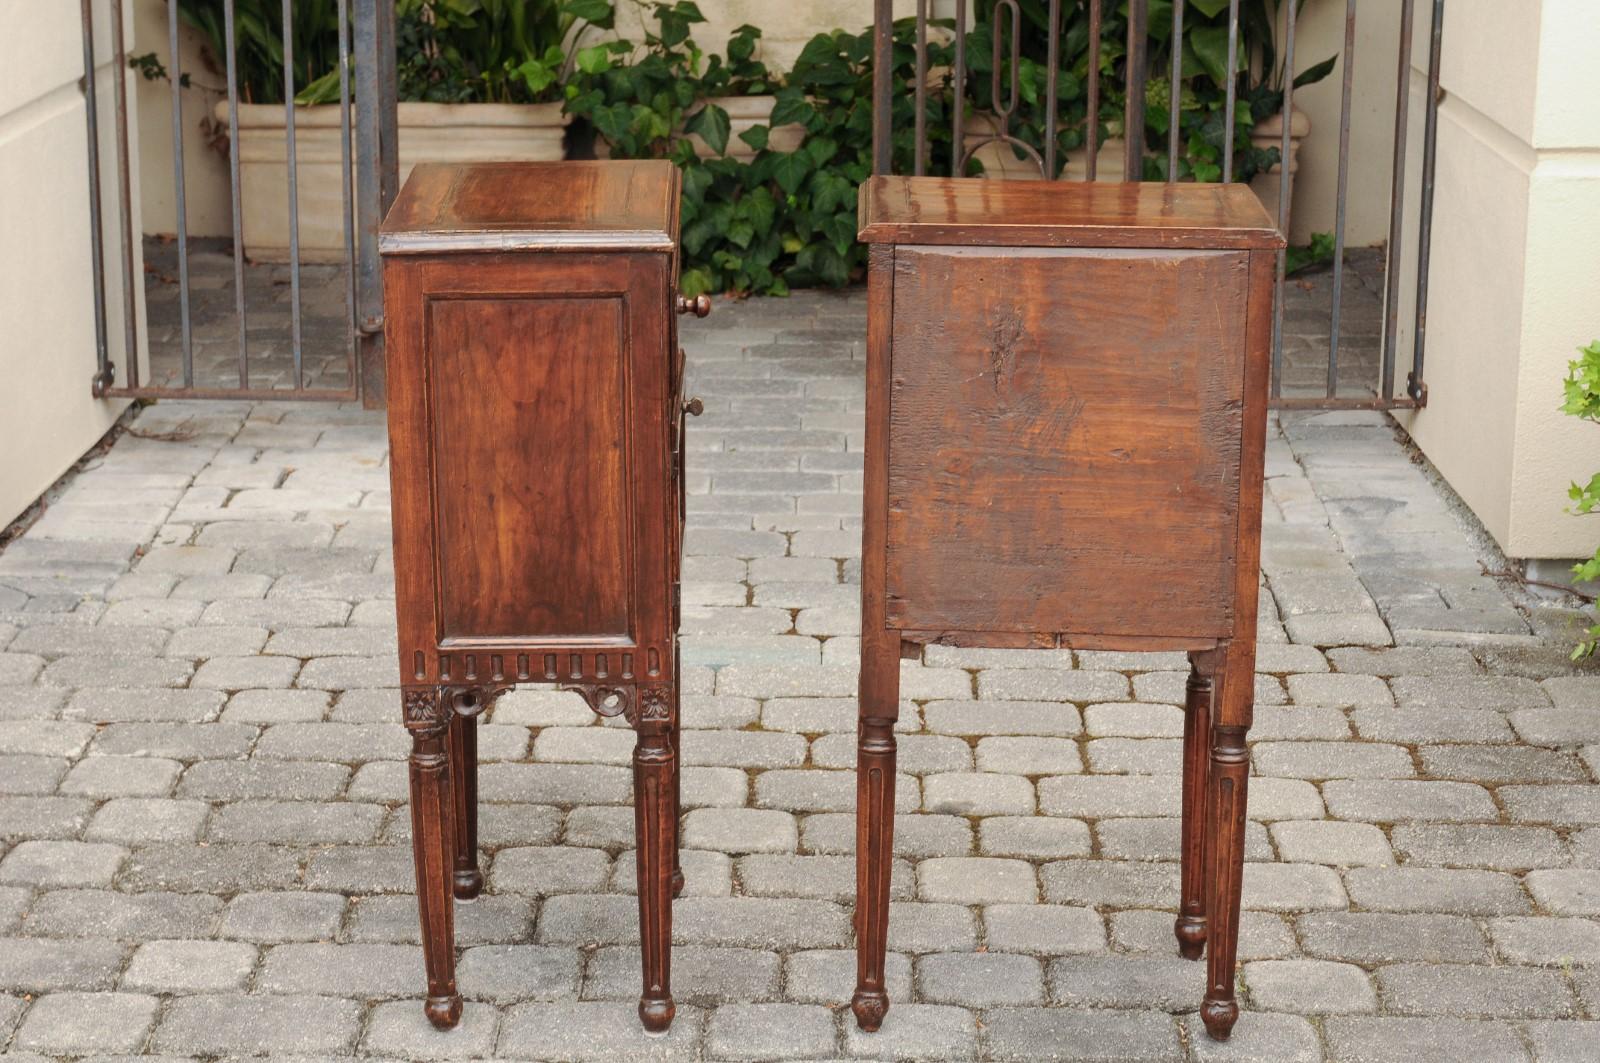 Pair of Italian Walnut Side Tables circa 1860 with Door, Drawer and Carved Skirt 4